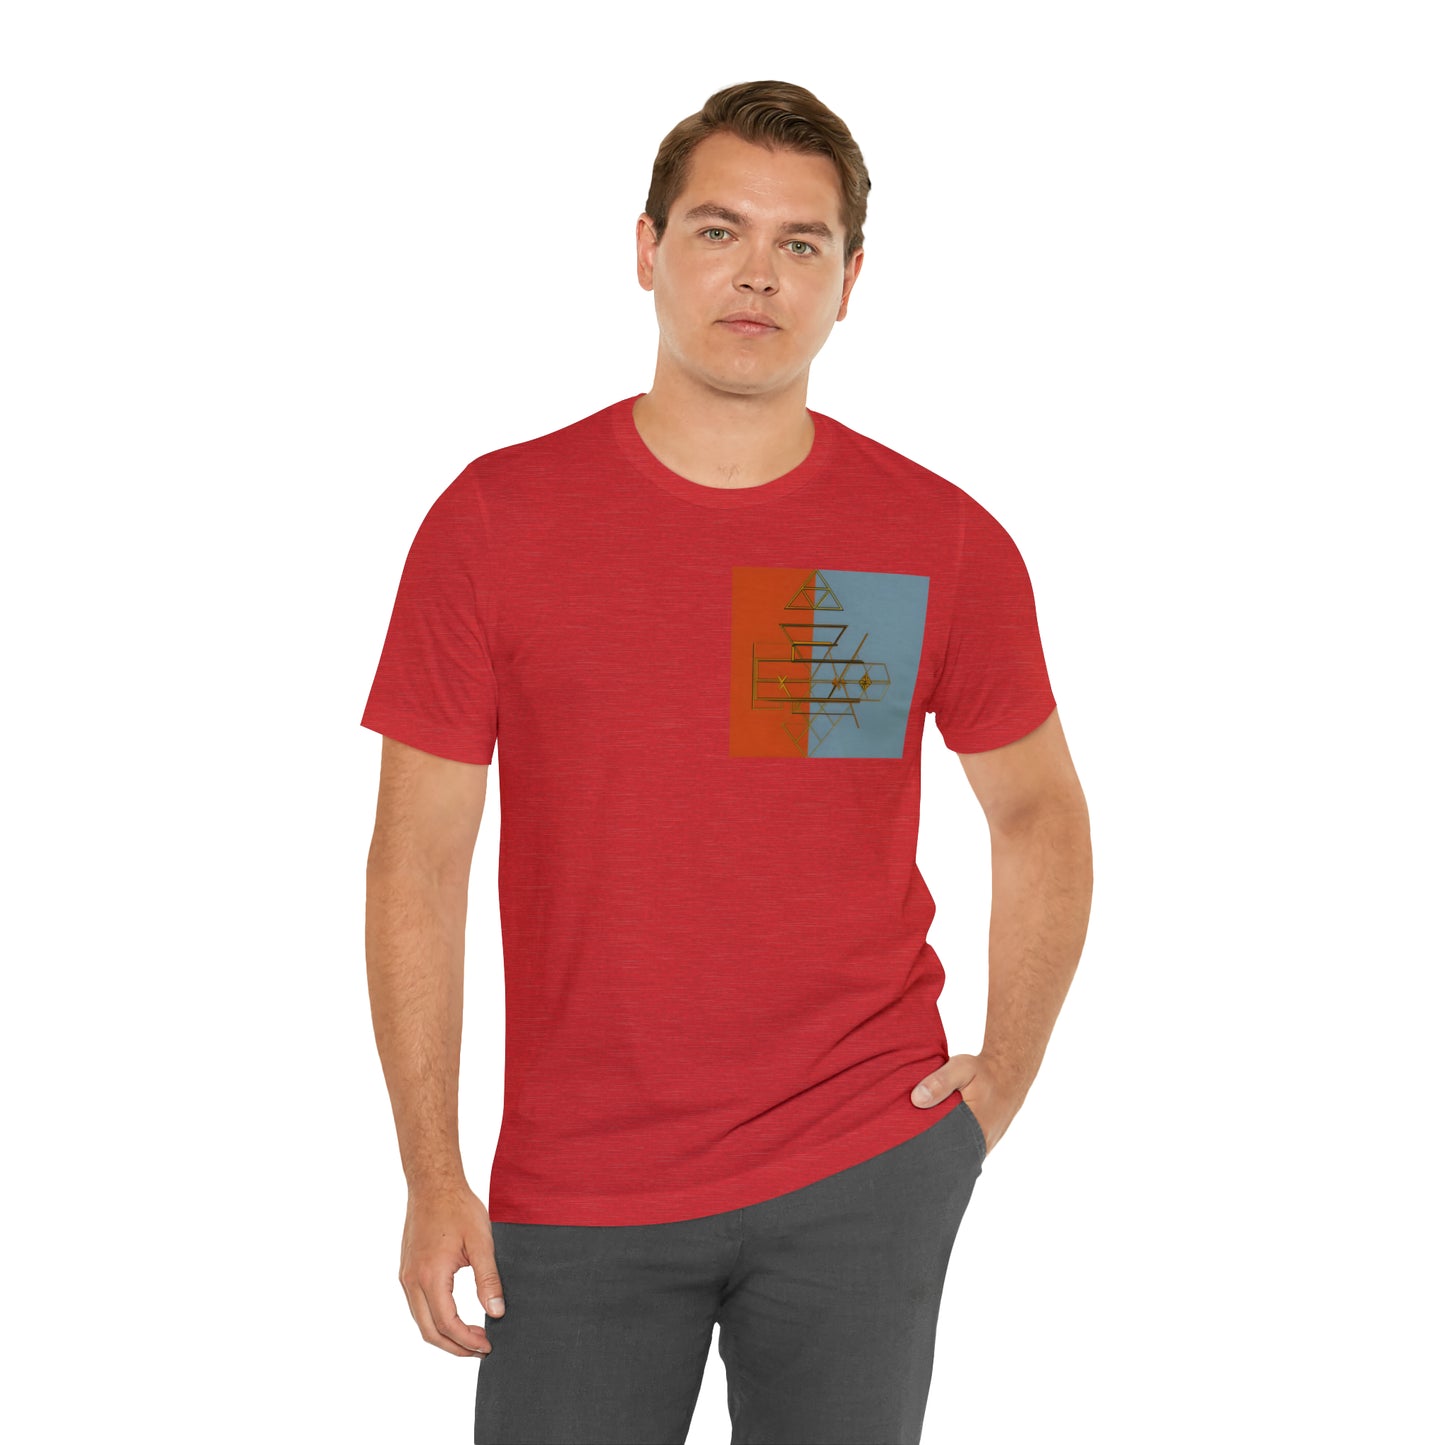 ABSTRACT SHAPES 102 - Unisex Jersey Short Sleeve Tee